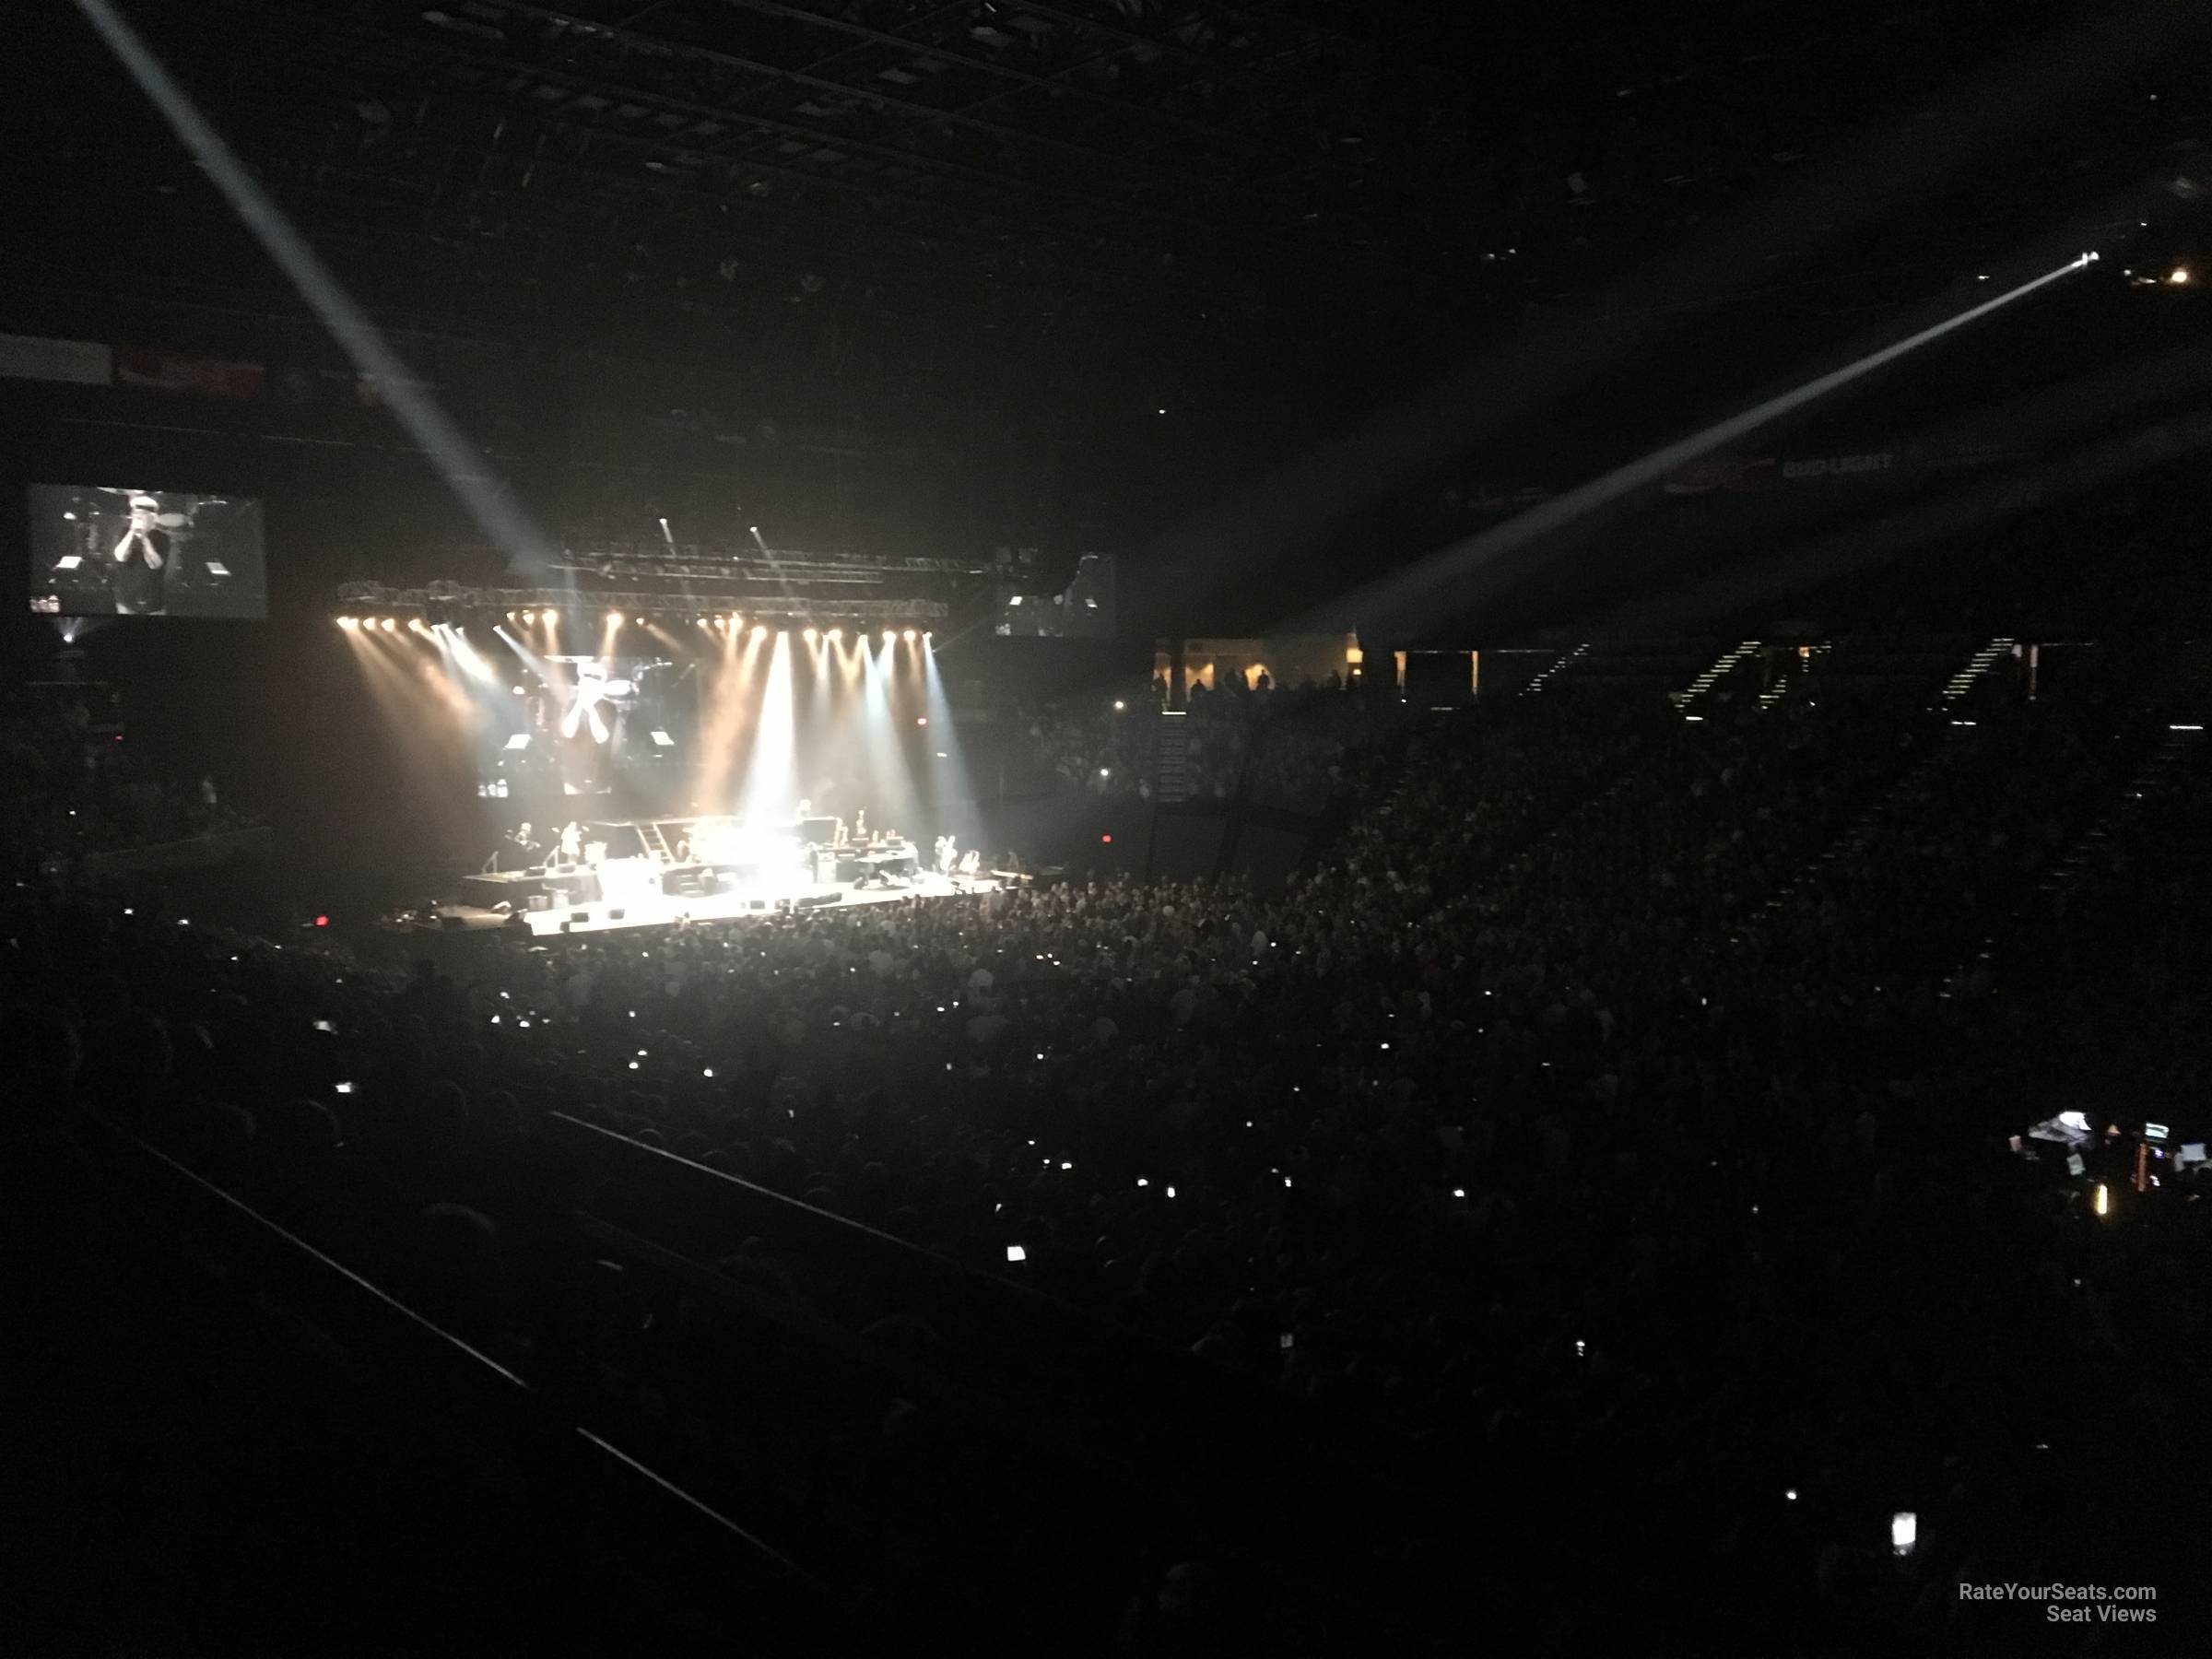 section 9, row x seat view  - mgm grand garden arena